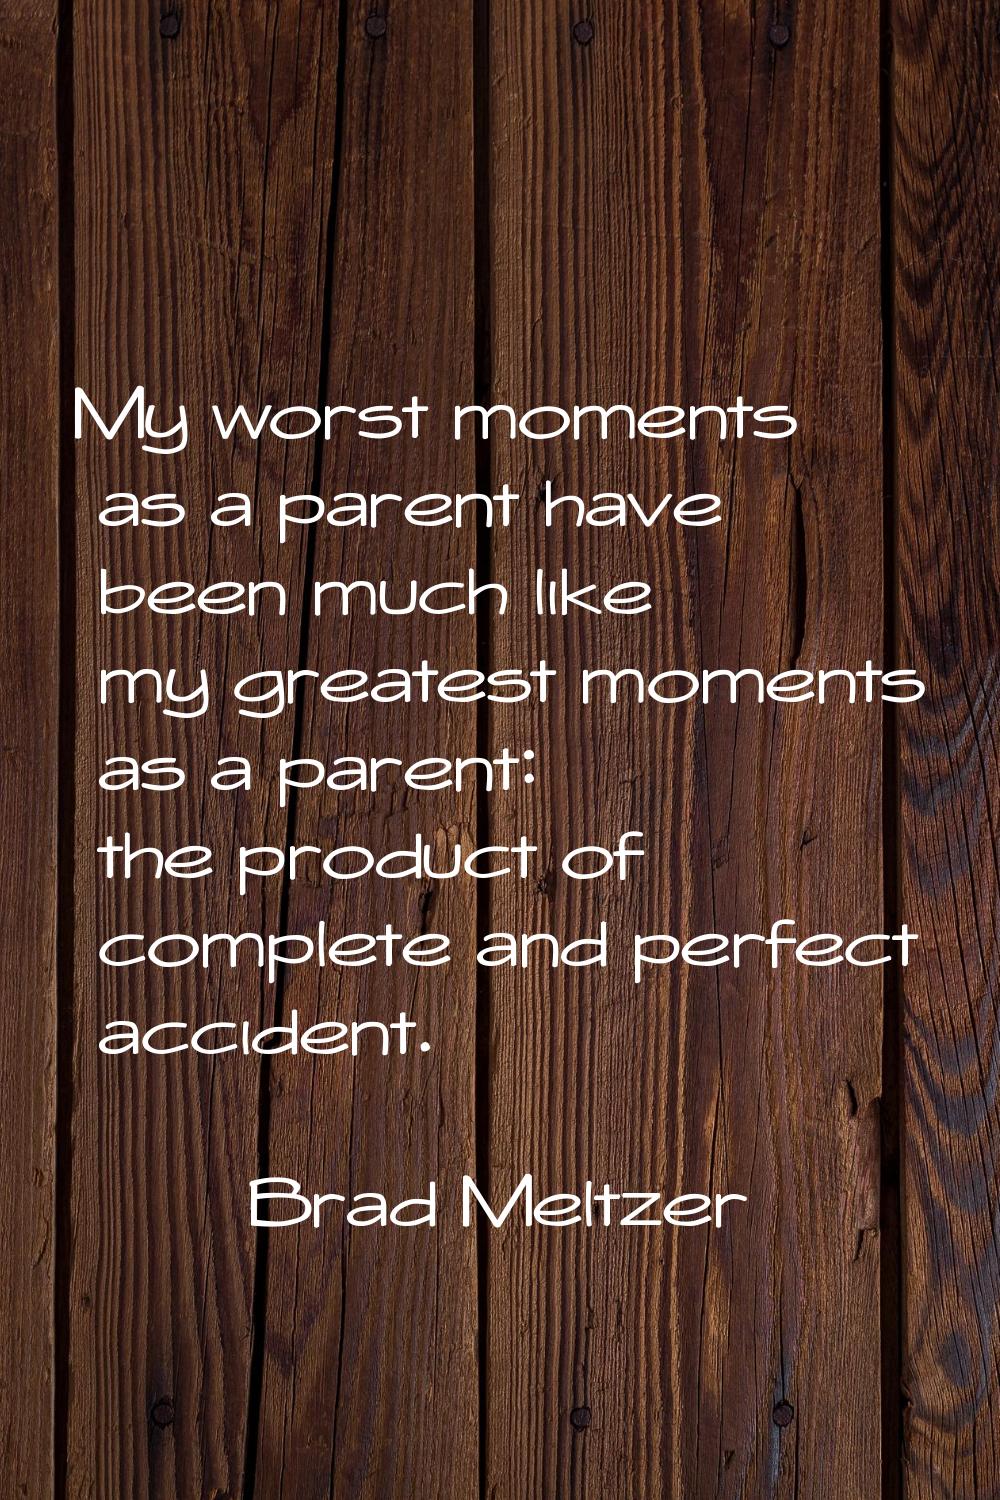 My worst moments as a parent have been much like my greatest moments as a parent: the product of co